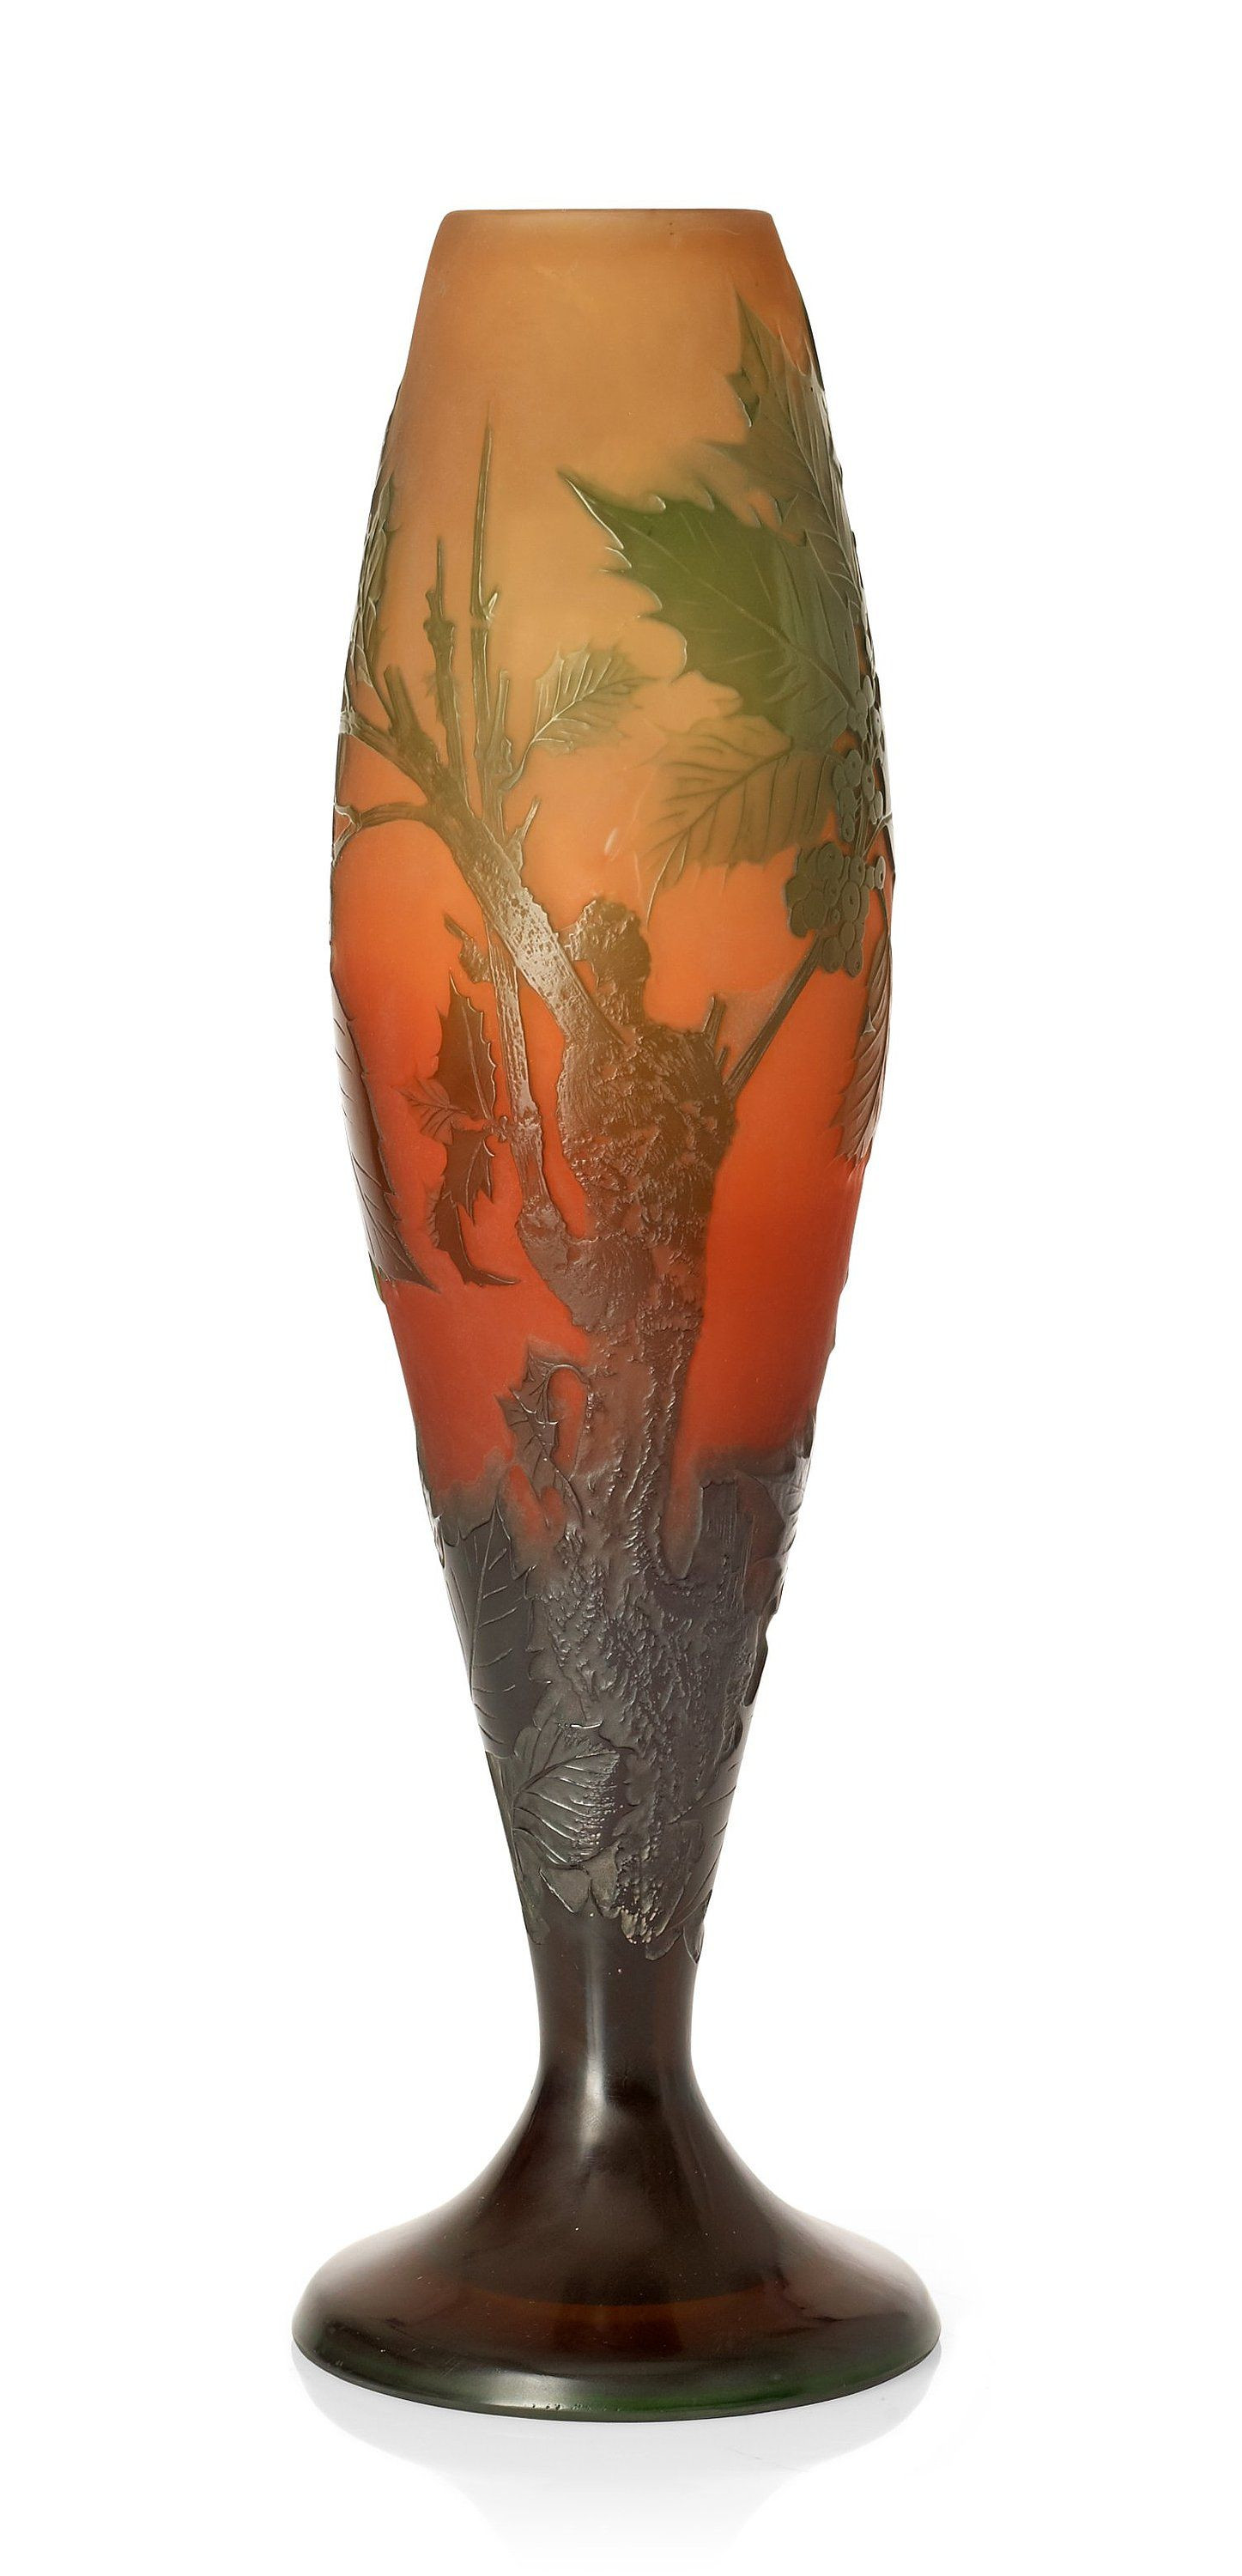 15 Stylish Cameo Glass Vase 2024 free download cameo glass vase of vase galla he is a french glassmaker art nouveau movement inside vase galla he is a french glassmaker art nouveau movement